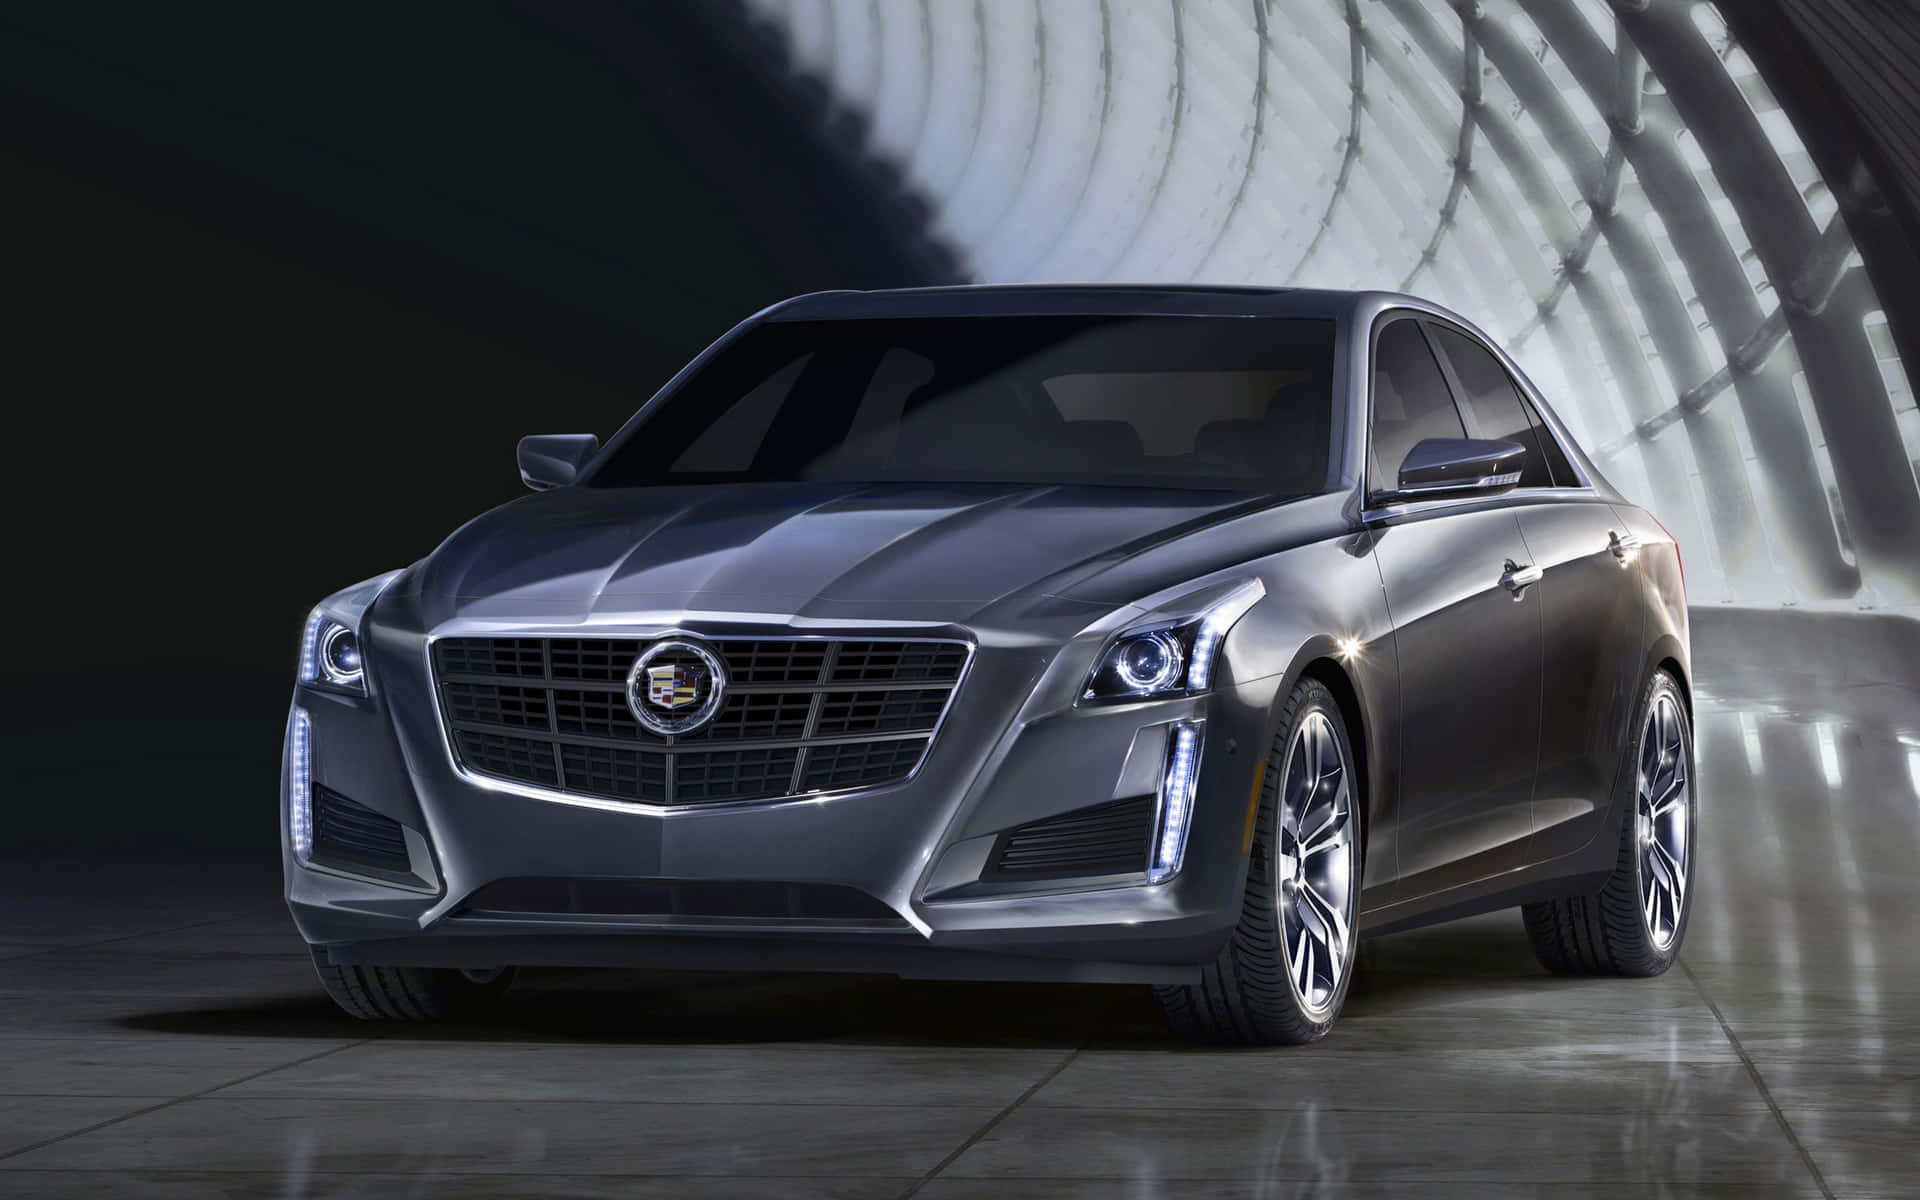 Stunning Cadillac CTS in a dazzling nighttime cityscape Wallpaper